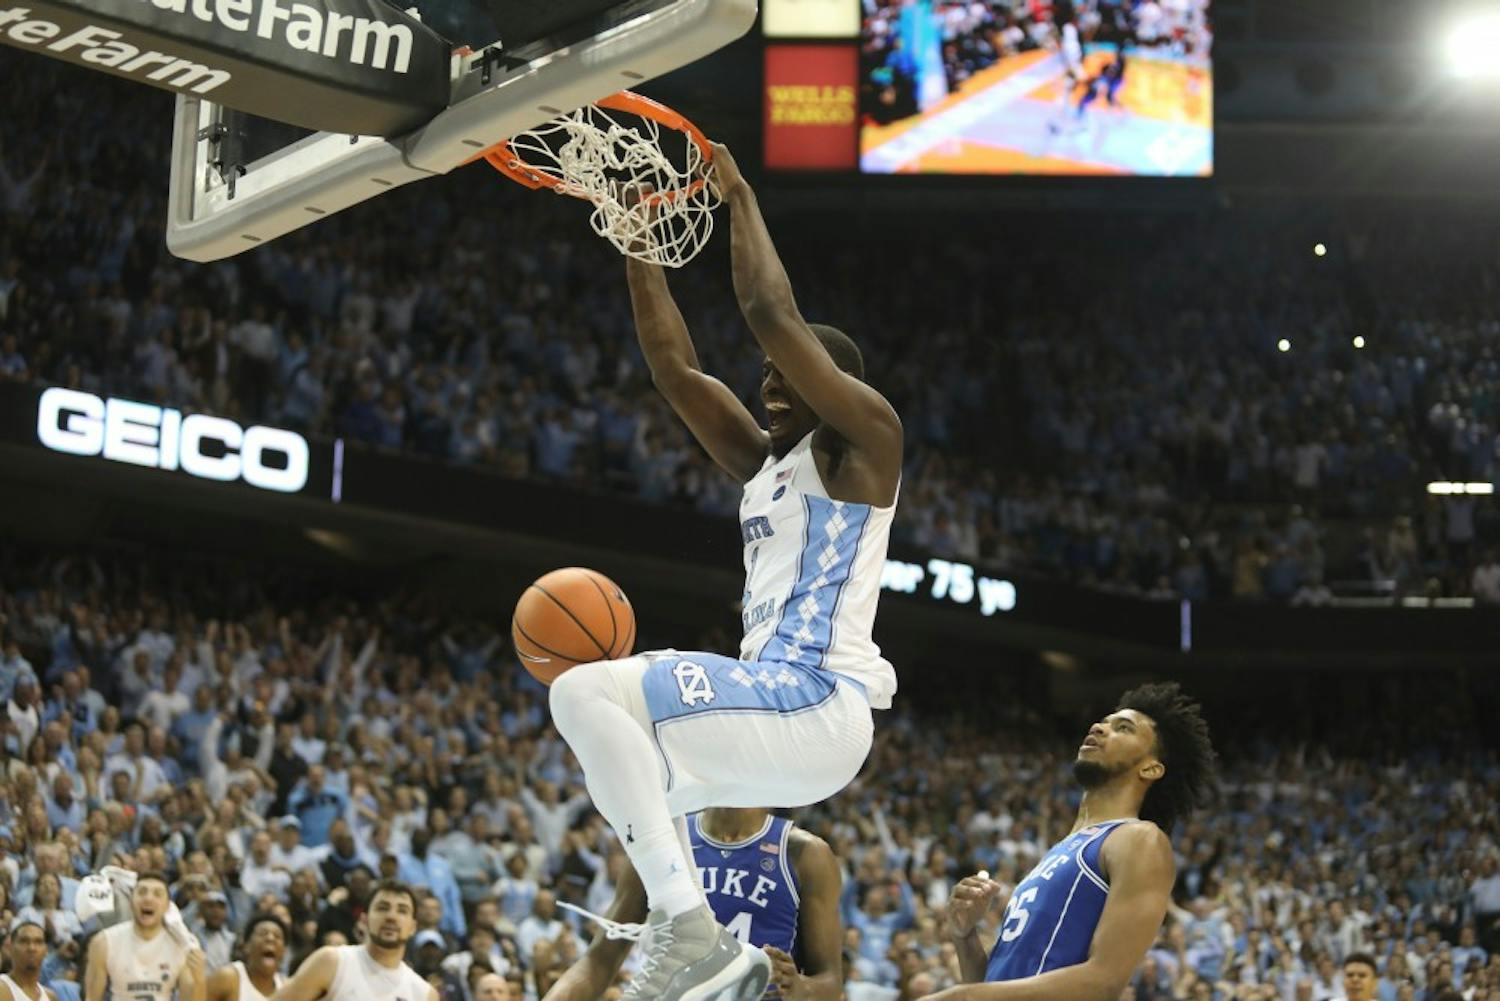 Forward Theo Pinson (1) dunks in the final seconds of UNC's 82-78 win over Duke on Thursday night in the Smith Center.